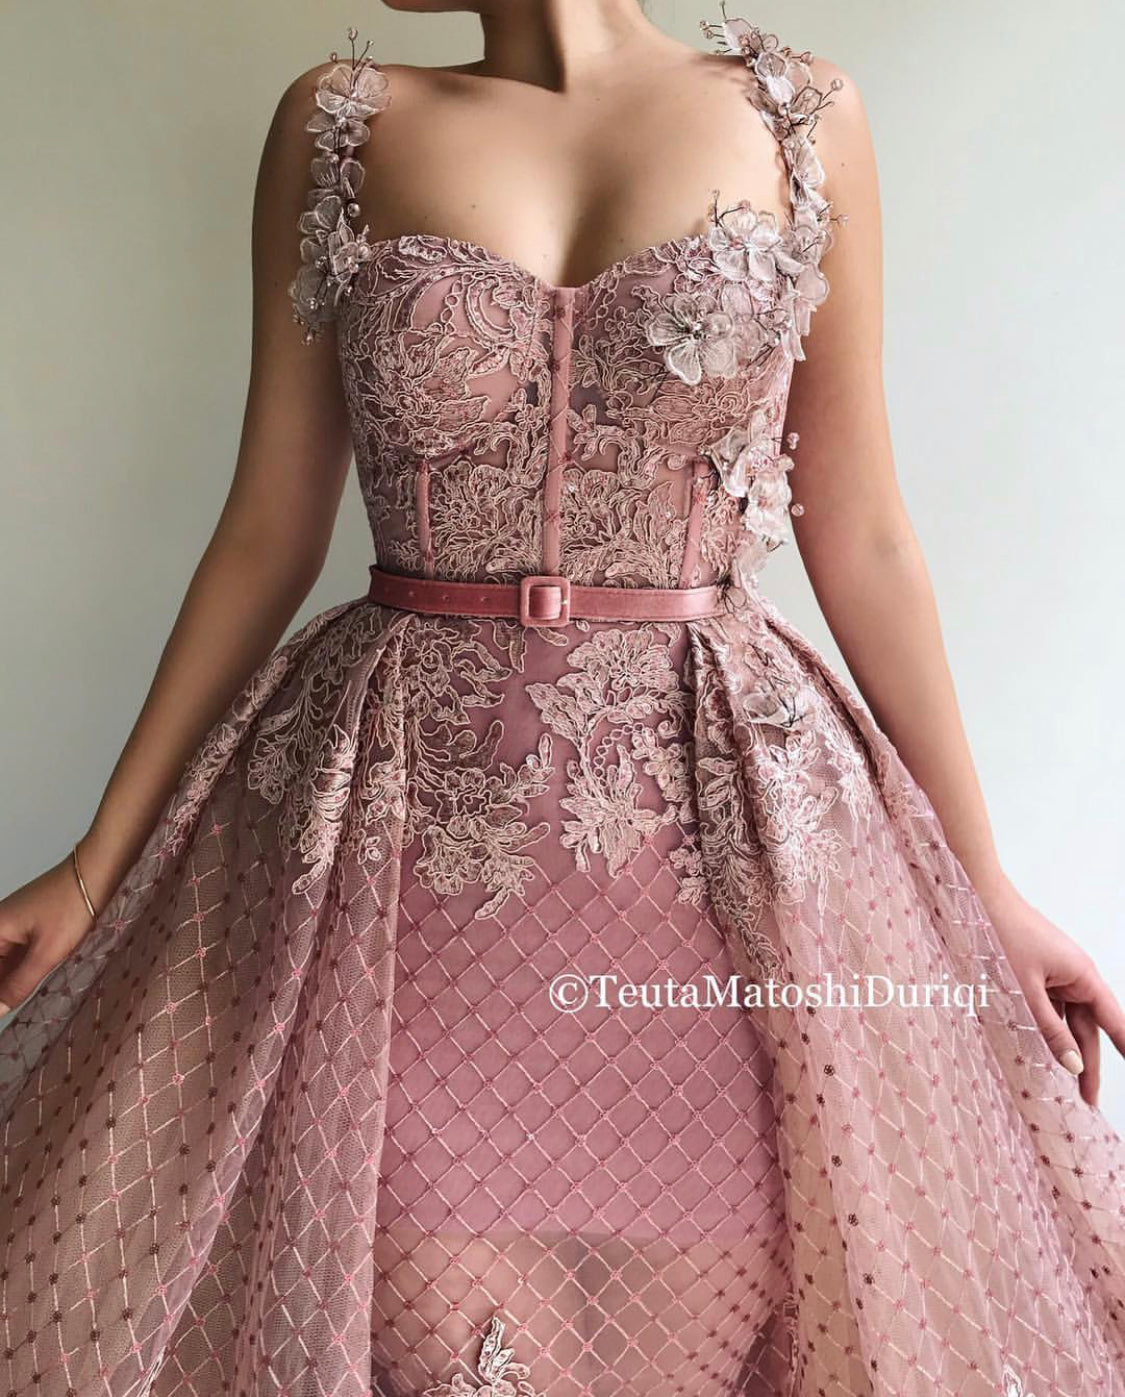 Pink overskirt dress with belt, lace, spaghetti straps and embroidery